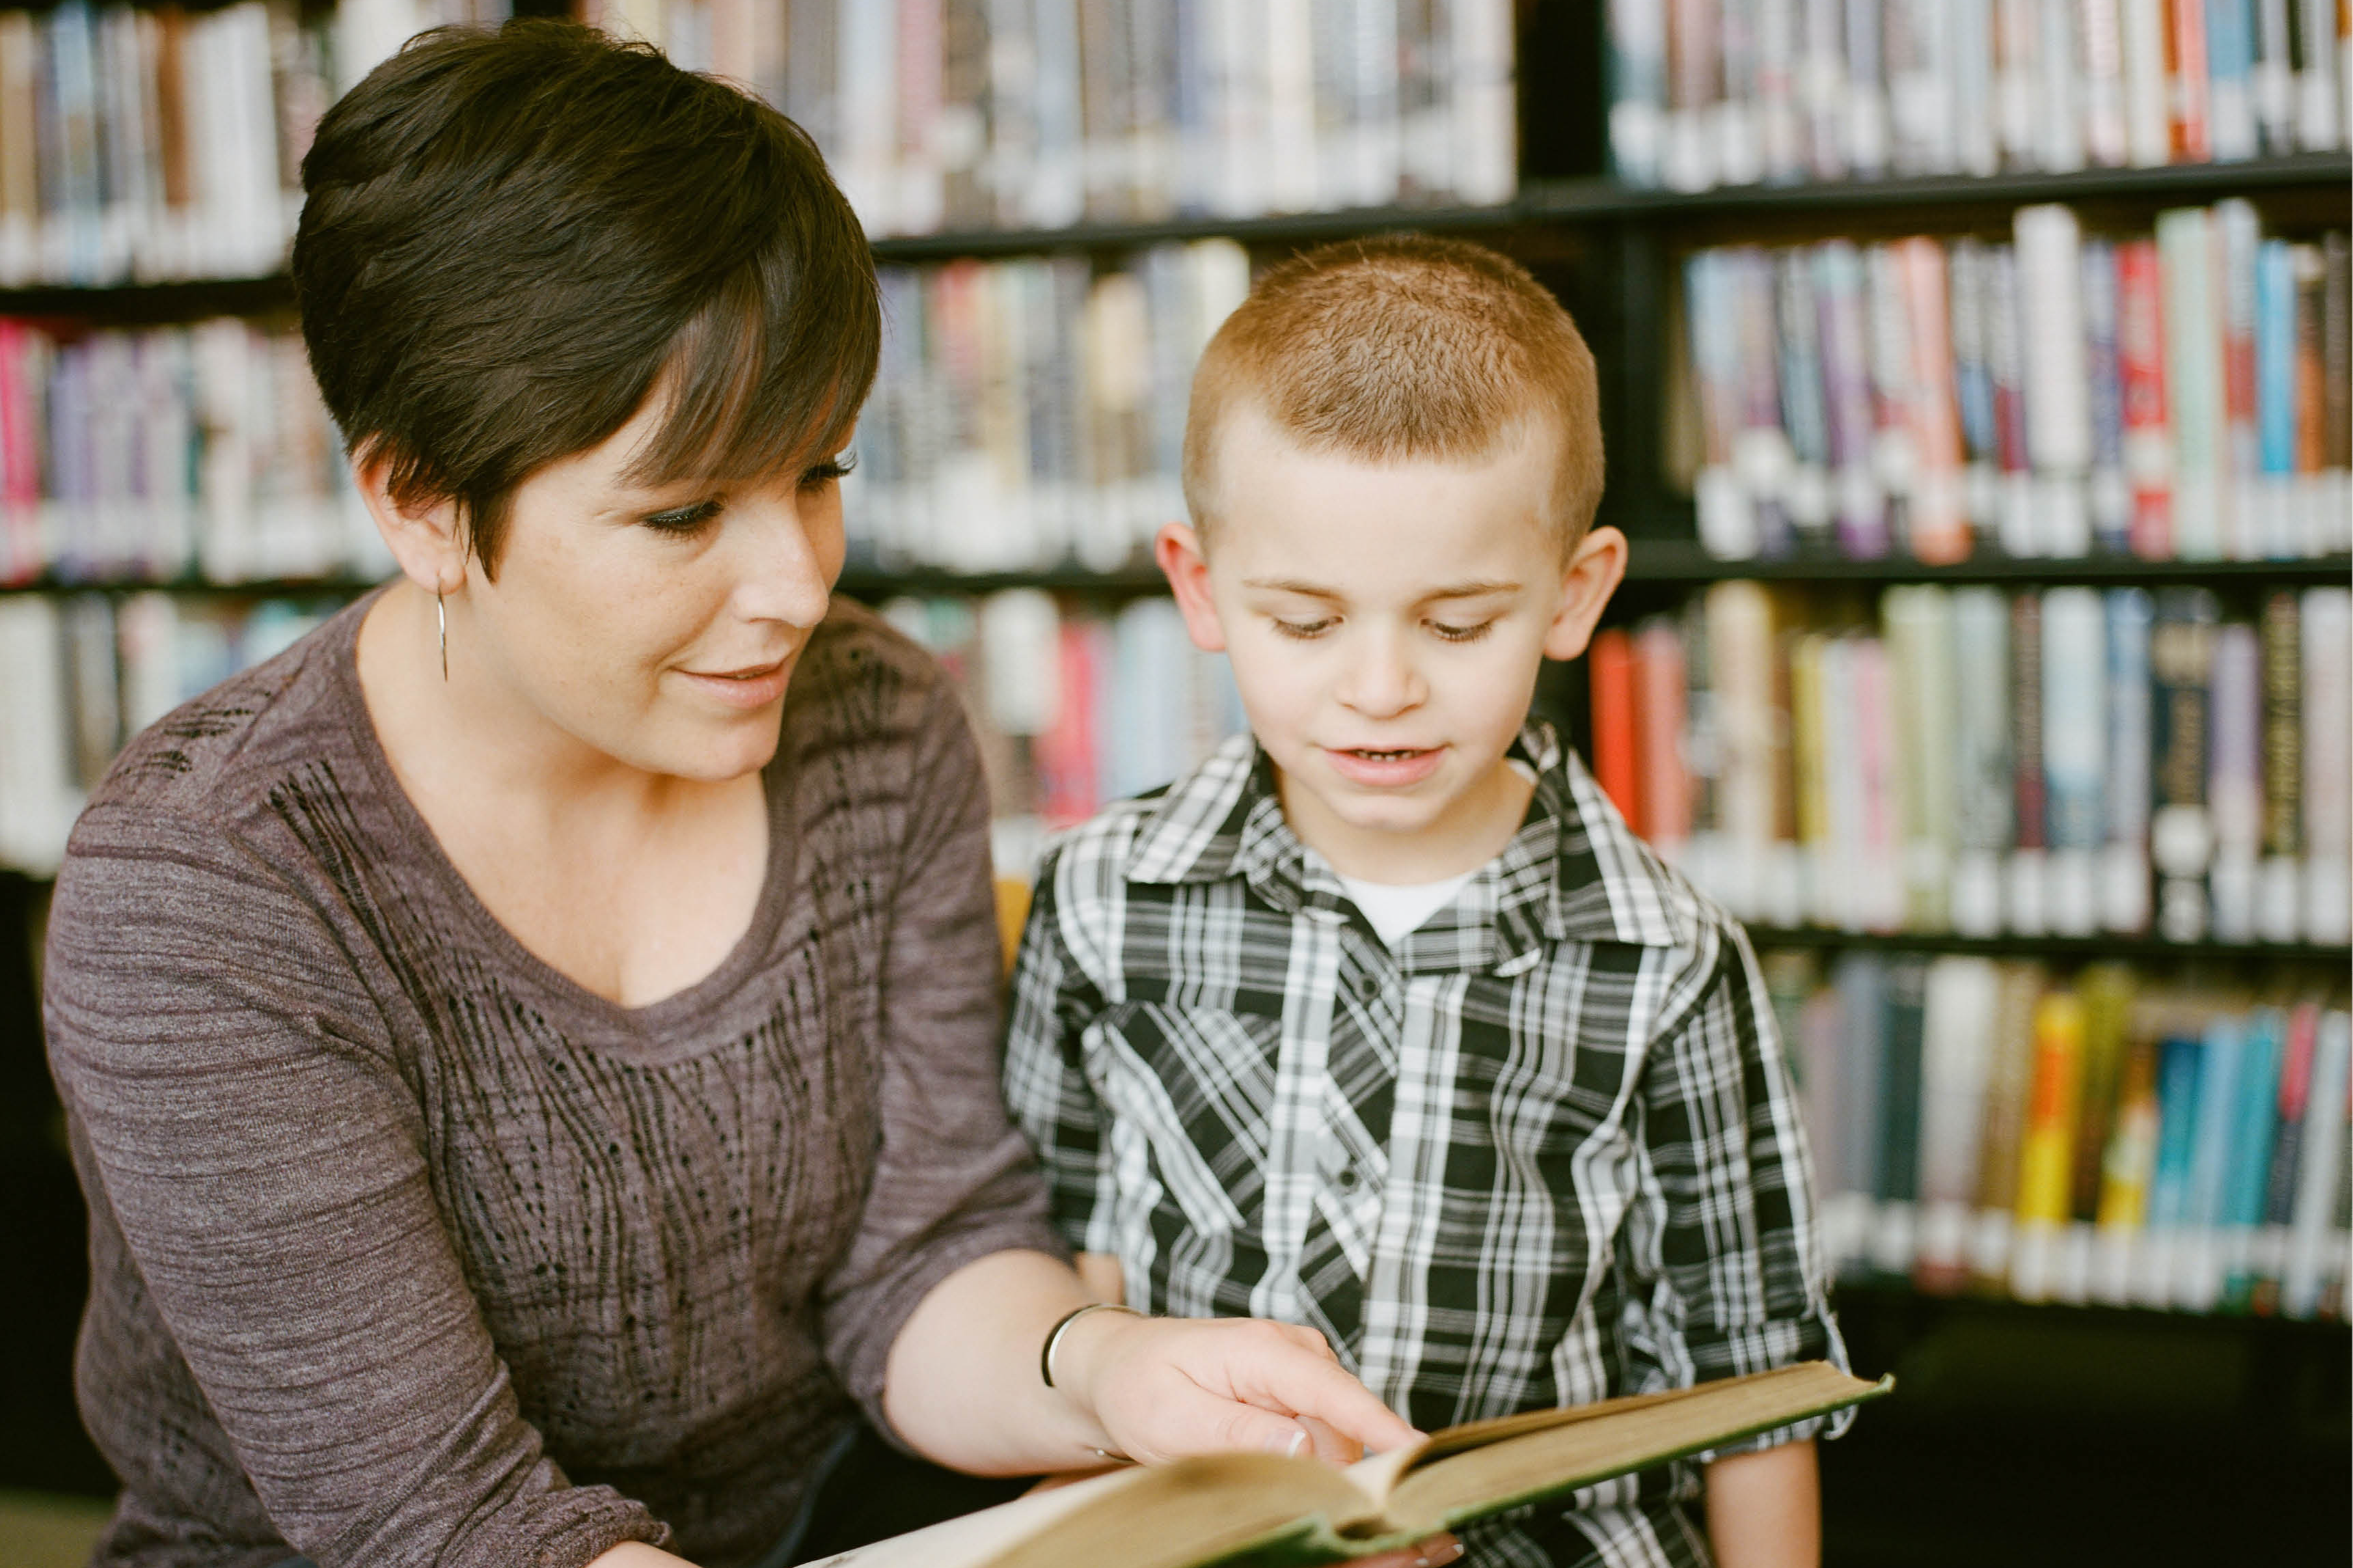 Woman and young boy reading a book in the library in front of a shelf of books blurry in the background. 